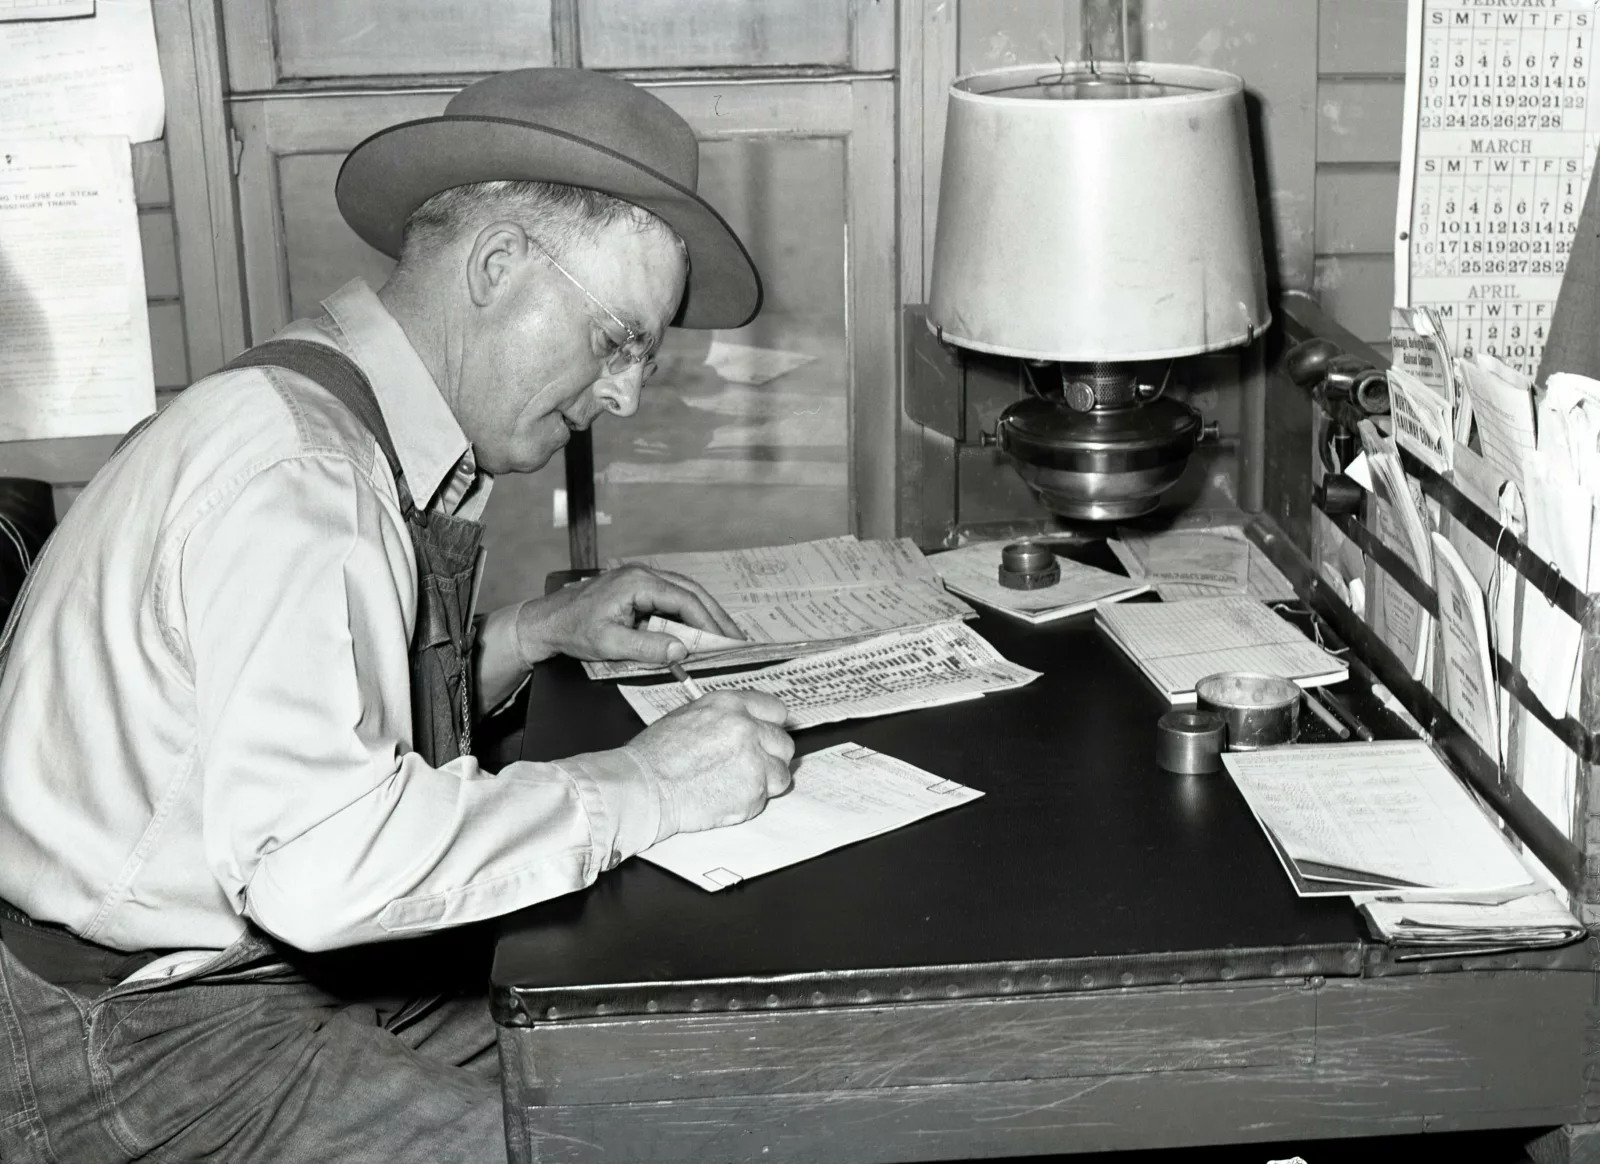 Man seated at a desk writing. There is a kerosene lamp and small piles of paper on the desk, as well as a rack on the edge of the desk, holding more papers.